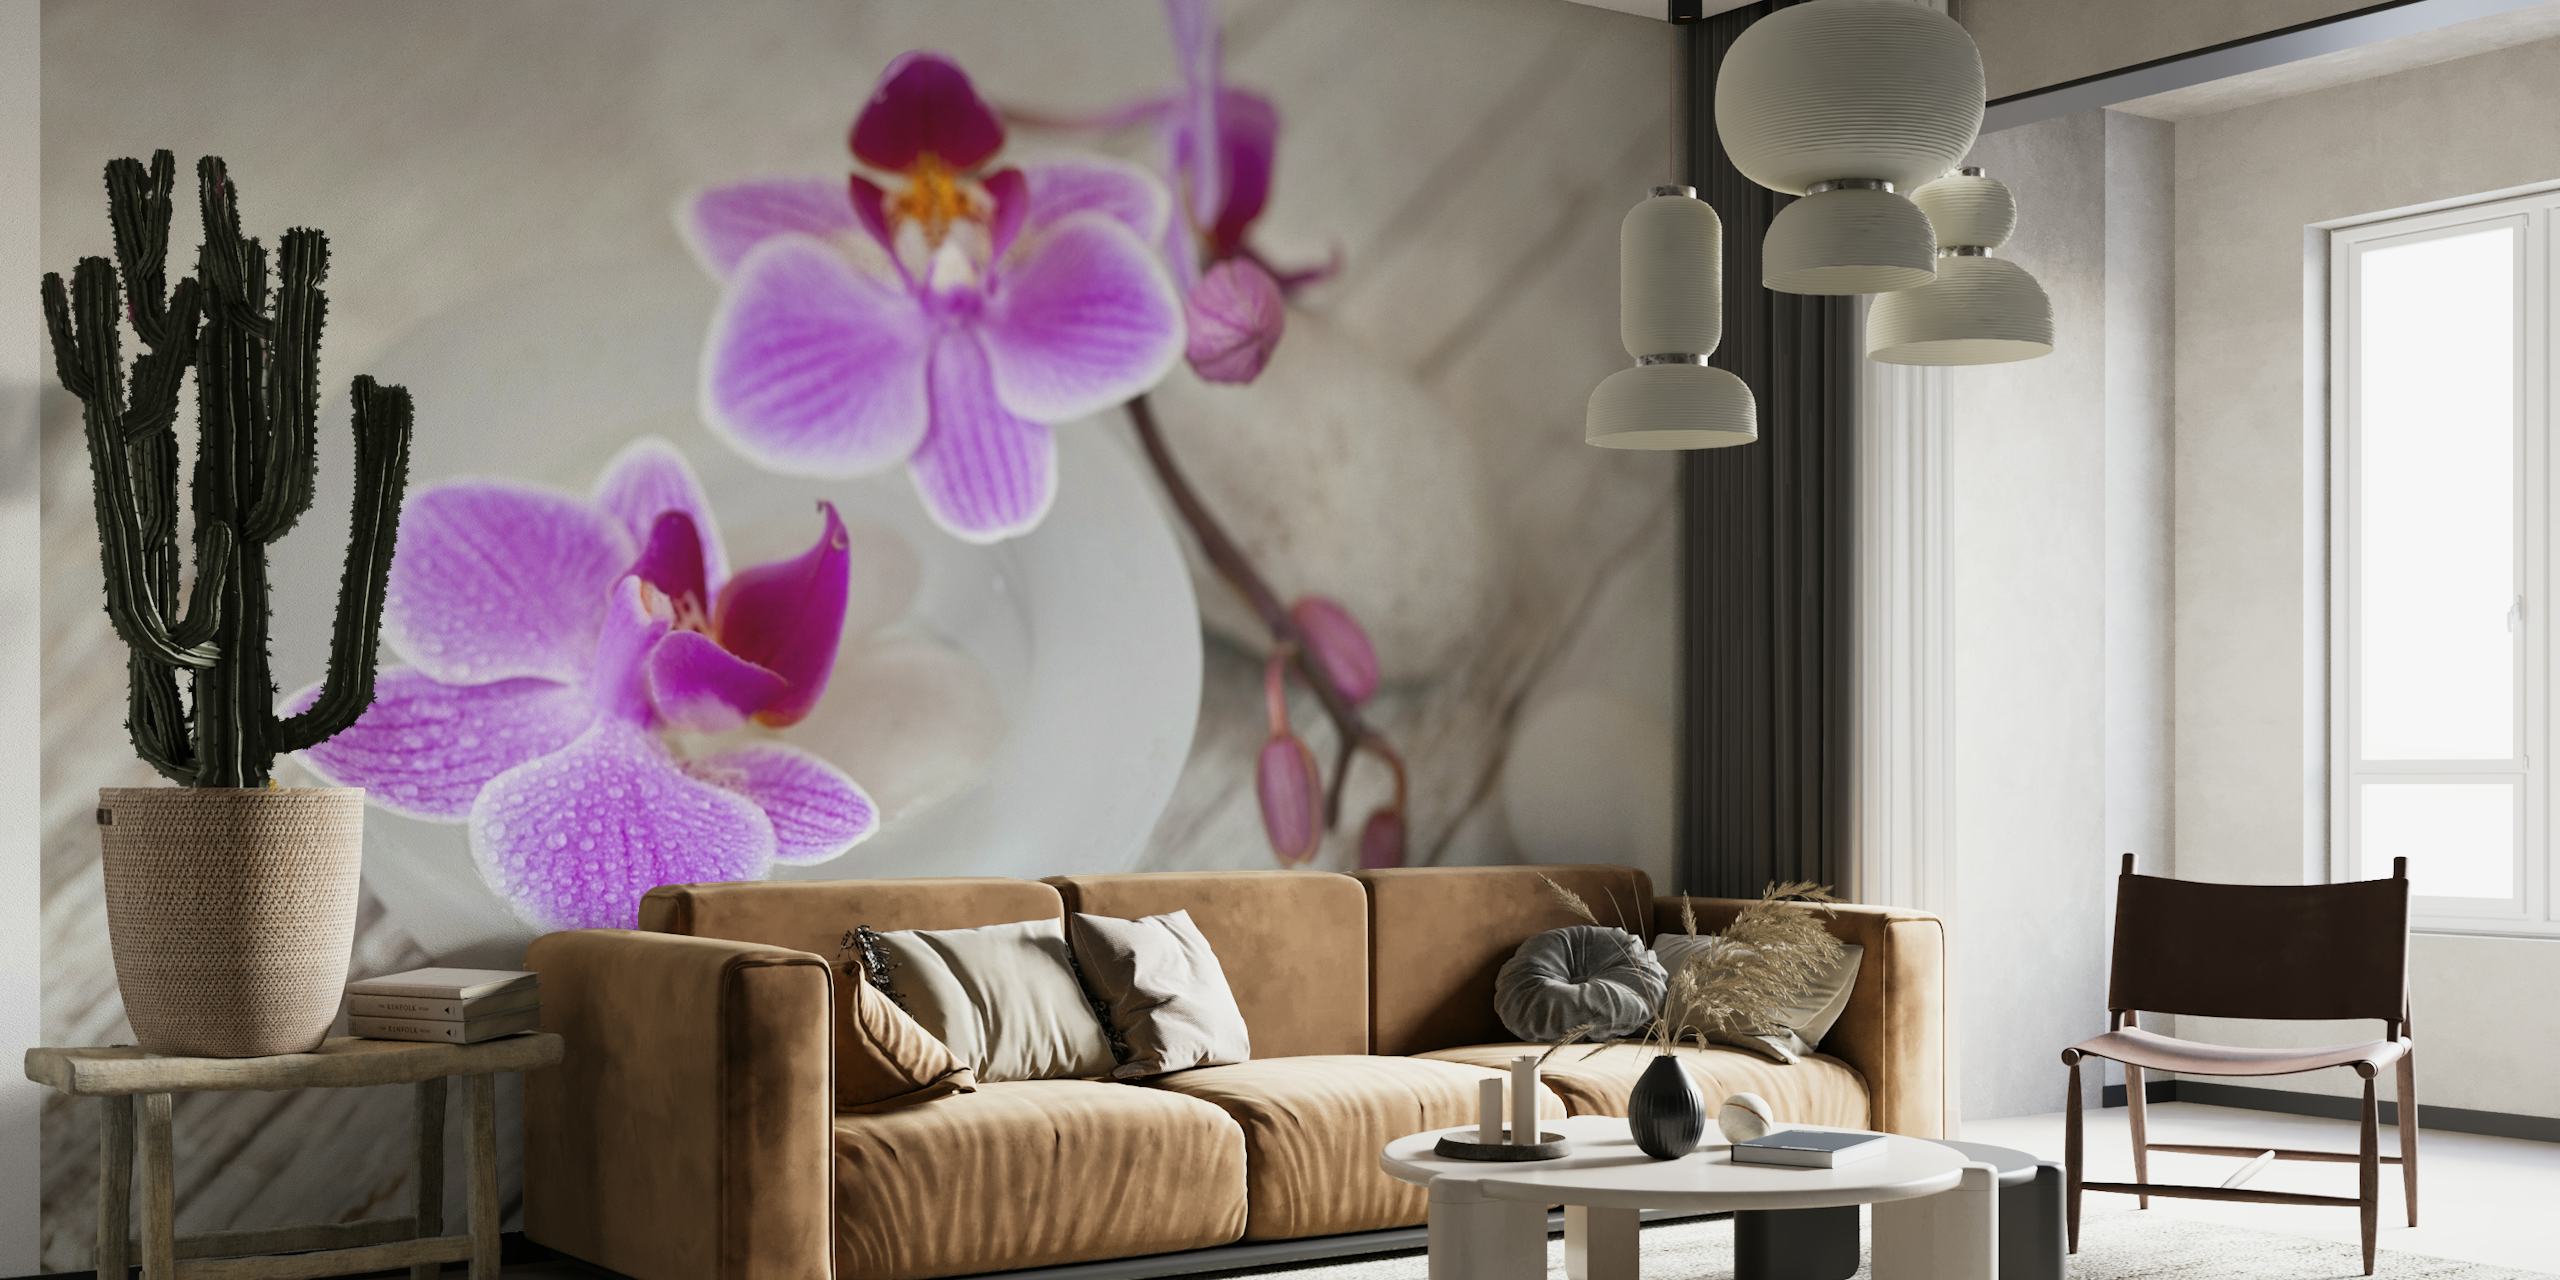 Pink Orchid Flower Still Life wall mural on a wooden backdrop with pebbles